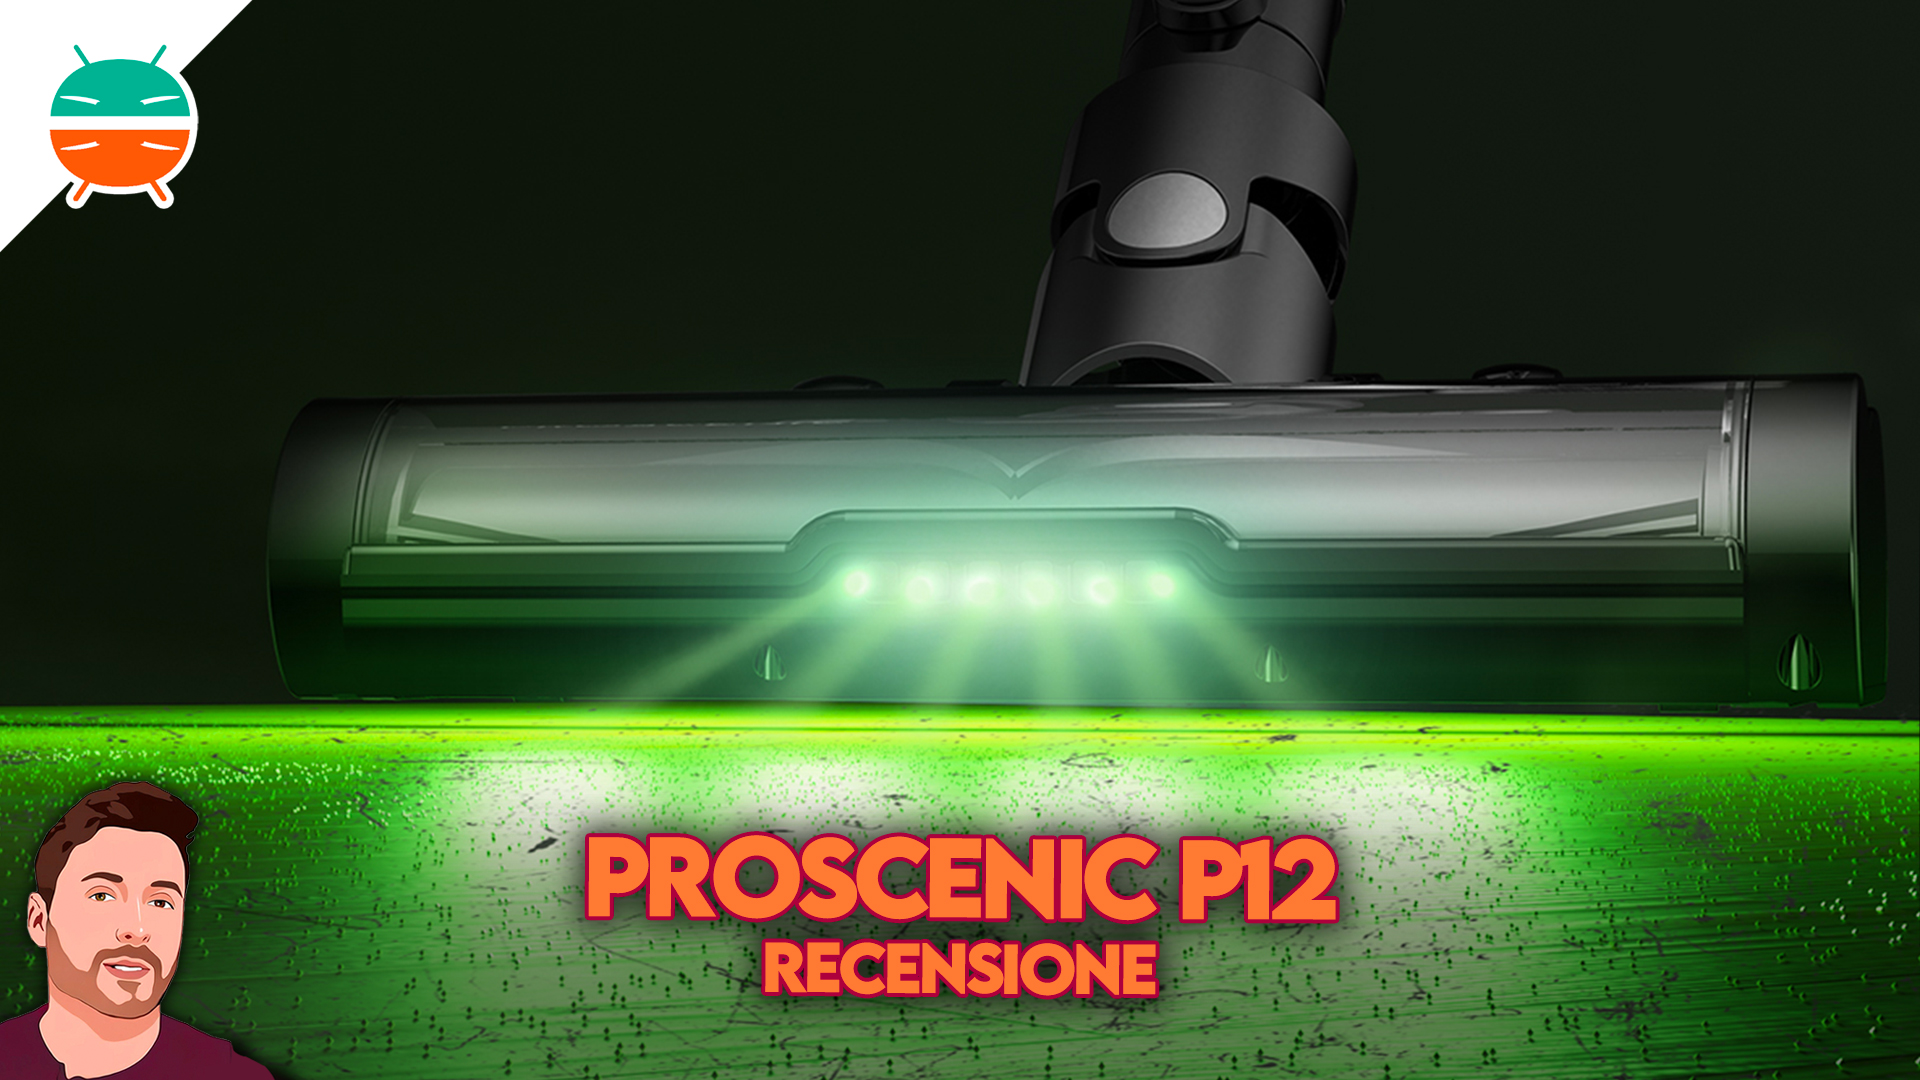 Proscenic P12 review: a reasonably priced cordless vacuum - TECHTELEGRAPH